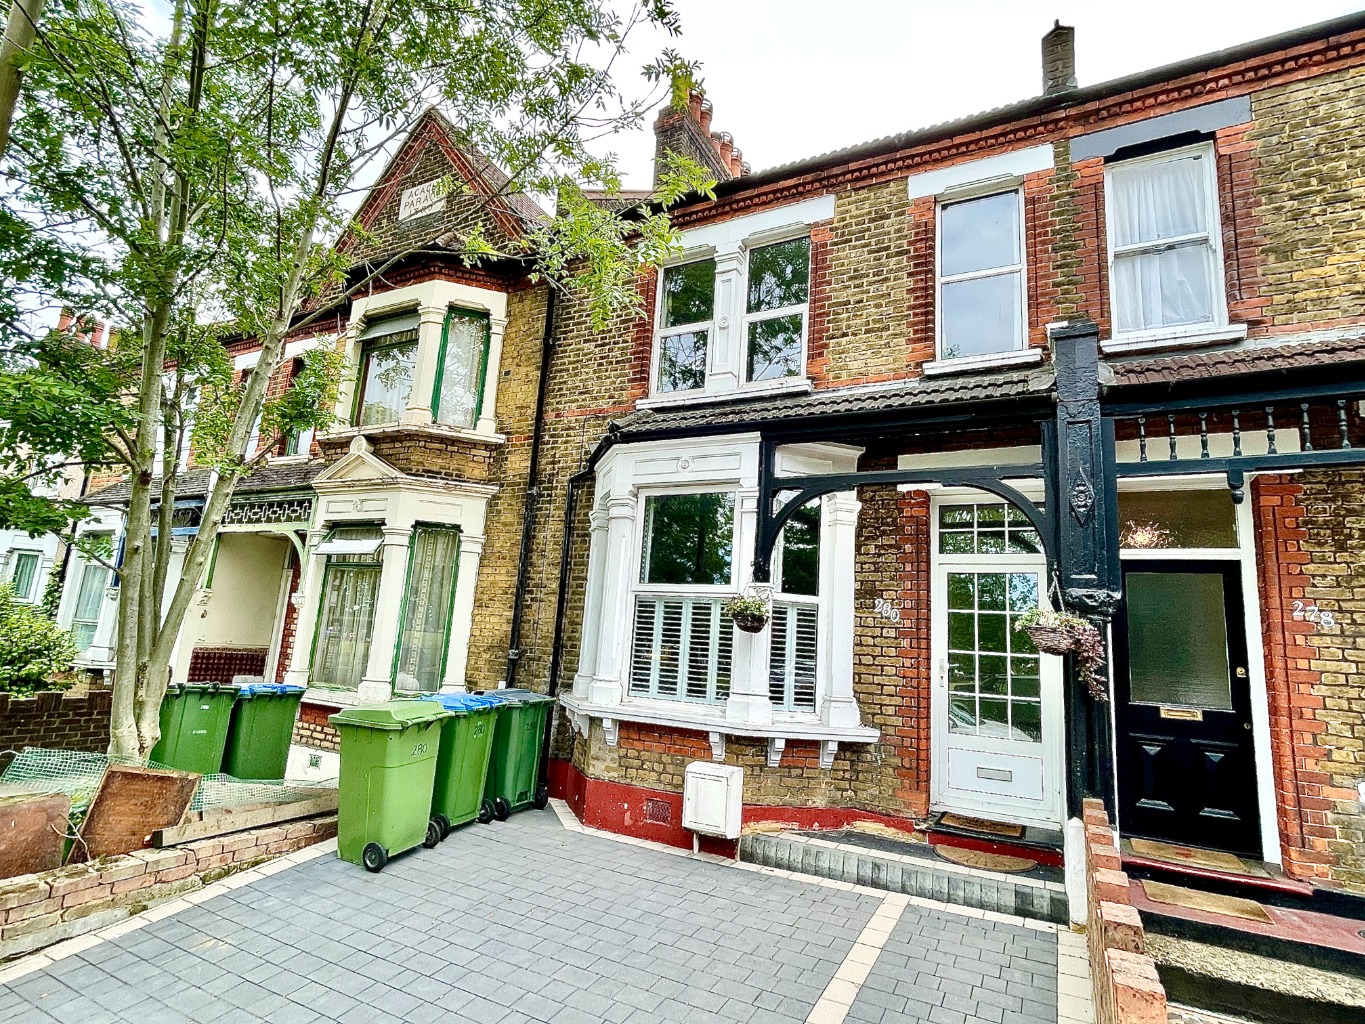 The house is in a great location, with direct views of Plumstead Common and being a short walk to local shops, including a CO-OP, as well as having bus routes on your doorstep. There are also a number of schools within close walking distance to choose from.